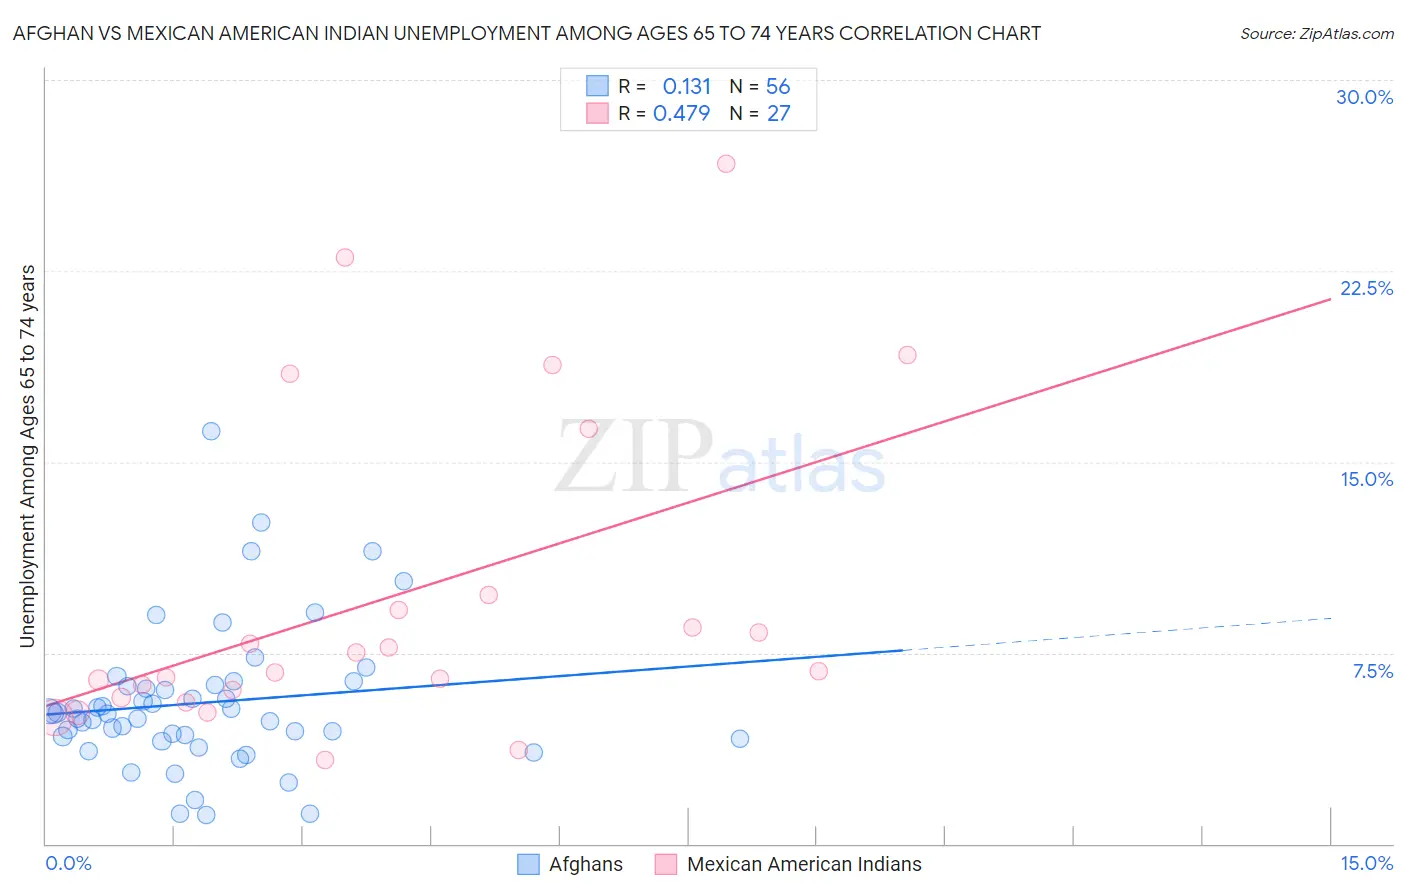 Afghan vs Mexican American Indian Unemployment Among Ages 65 to 74 years